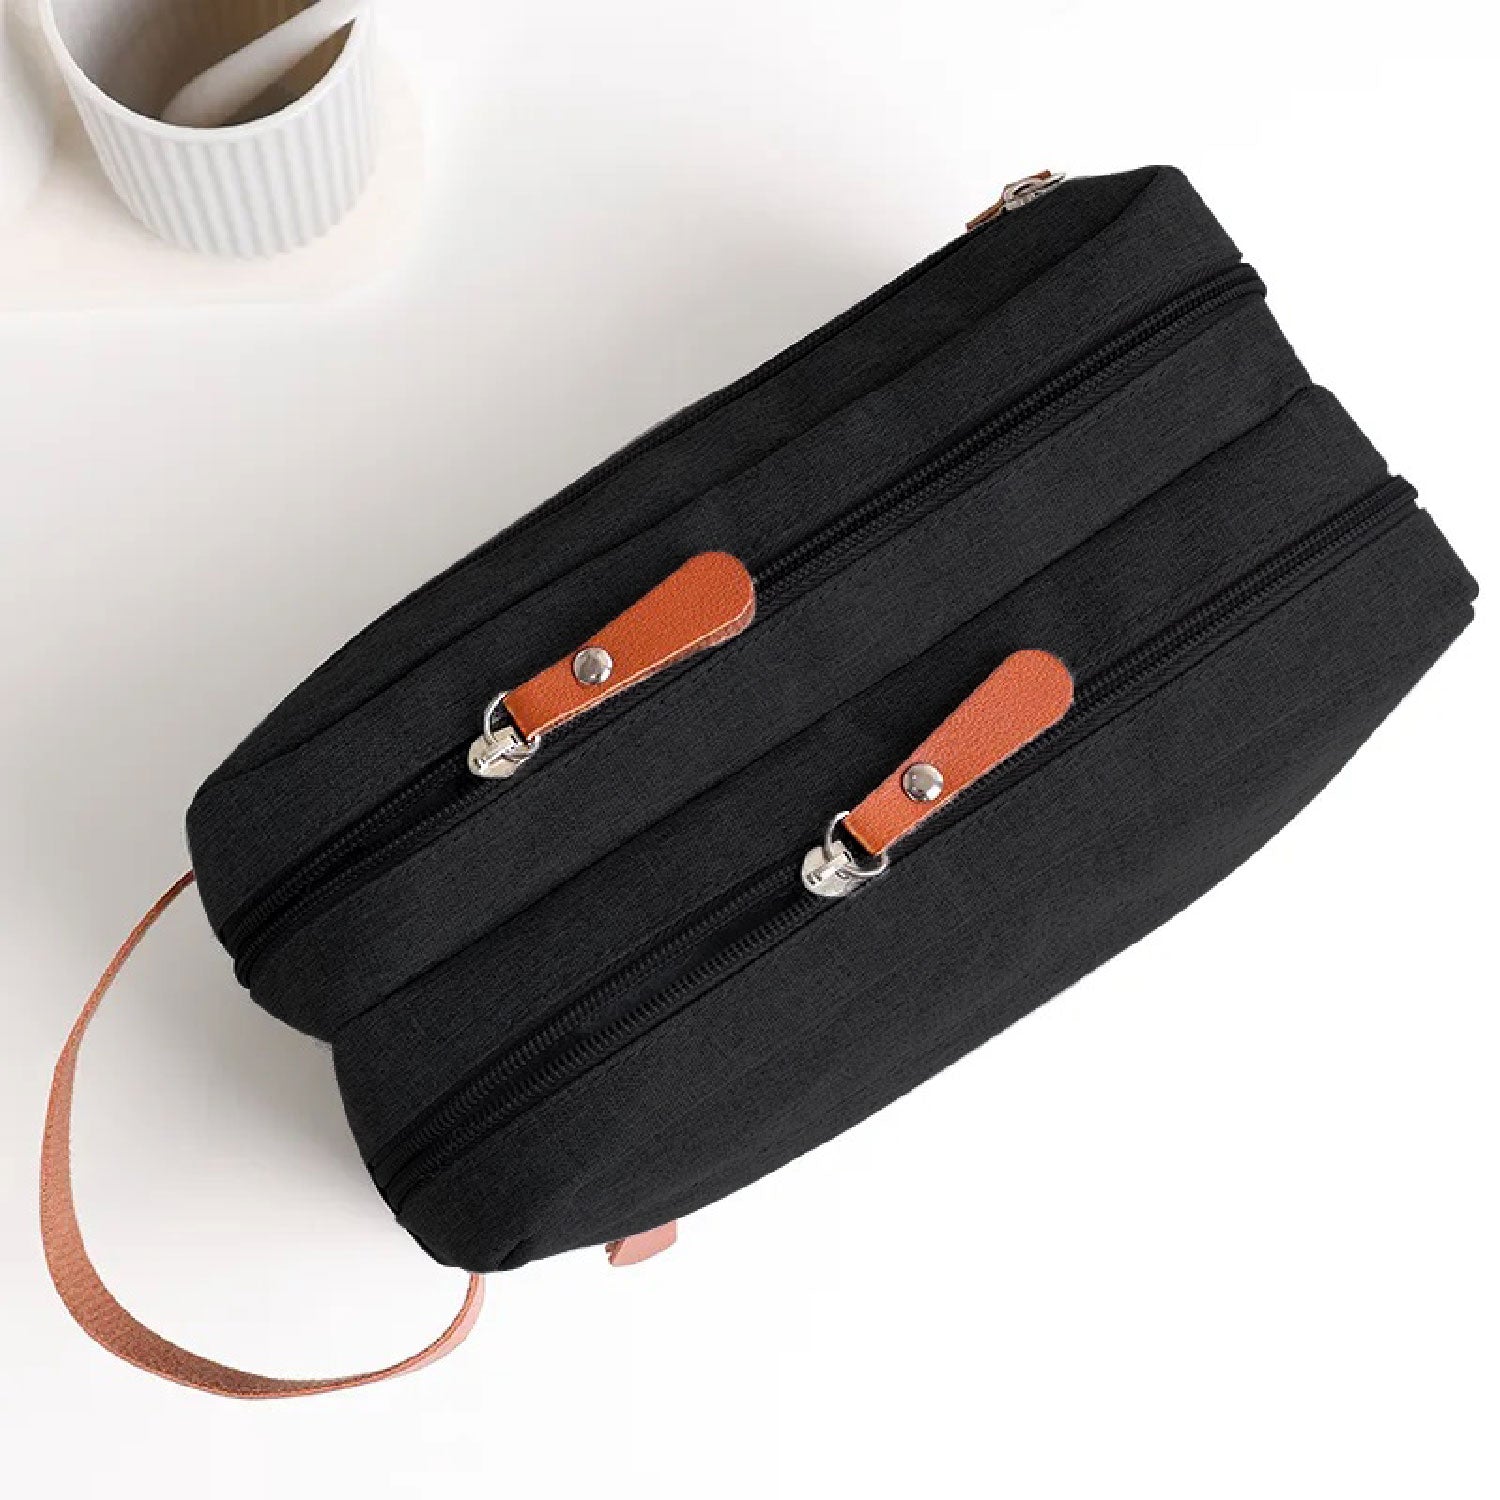 Clean Carry All | Toiletry Organizer Pouch